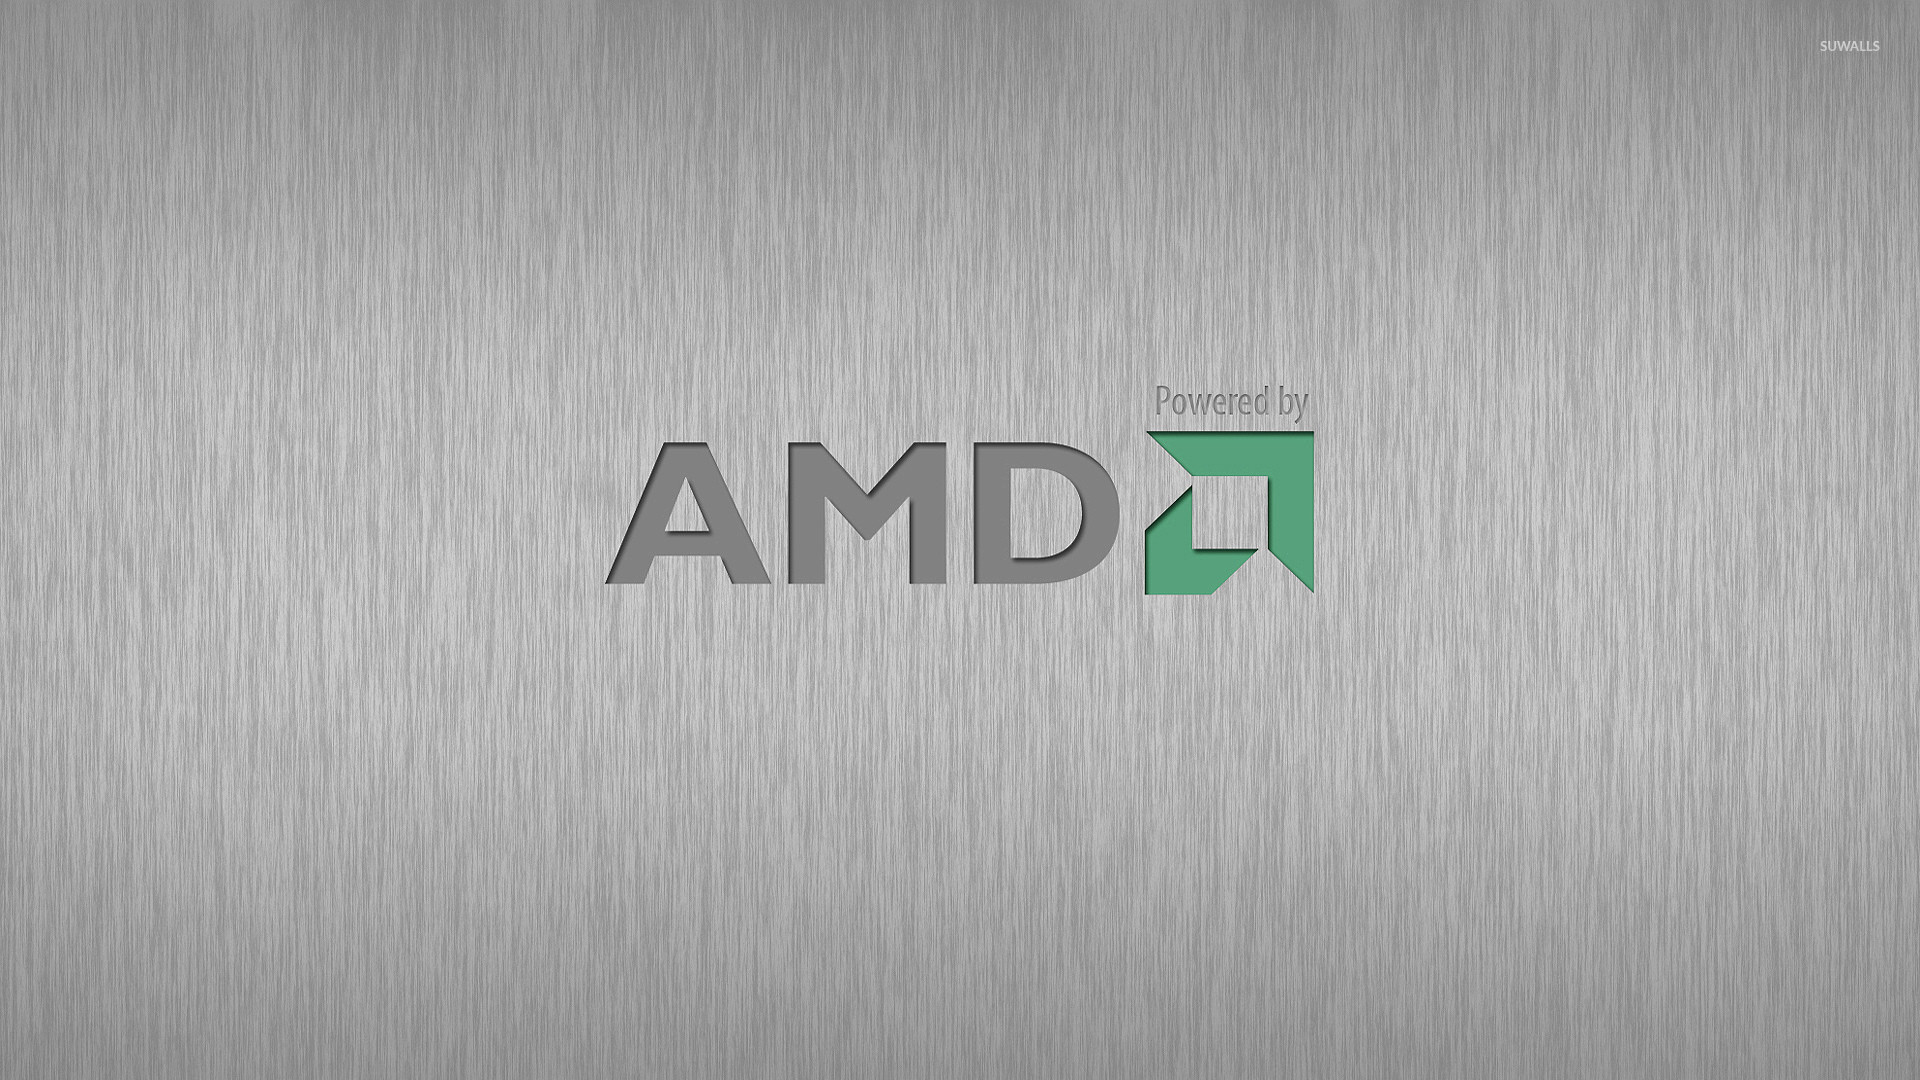 1920x1080 Powered by AMD wallpaper